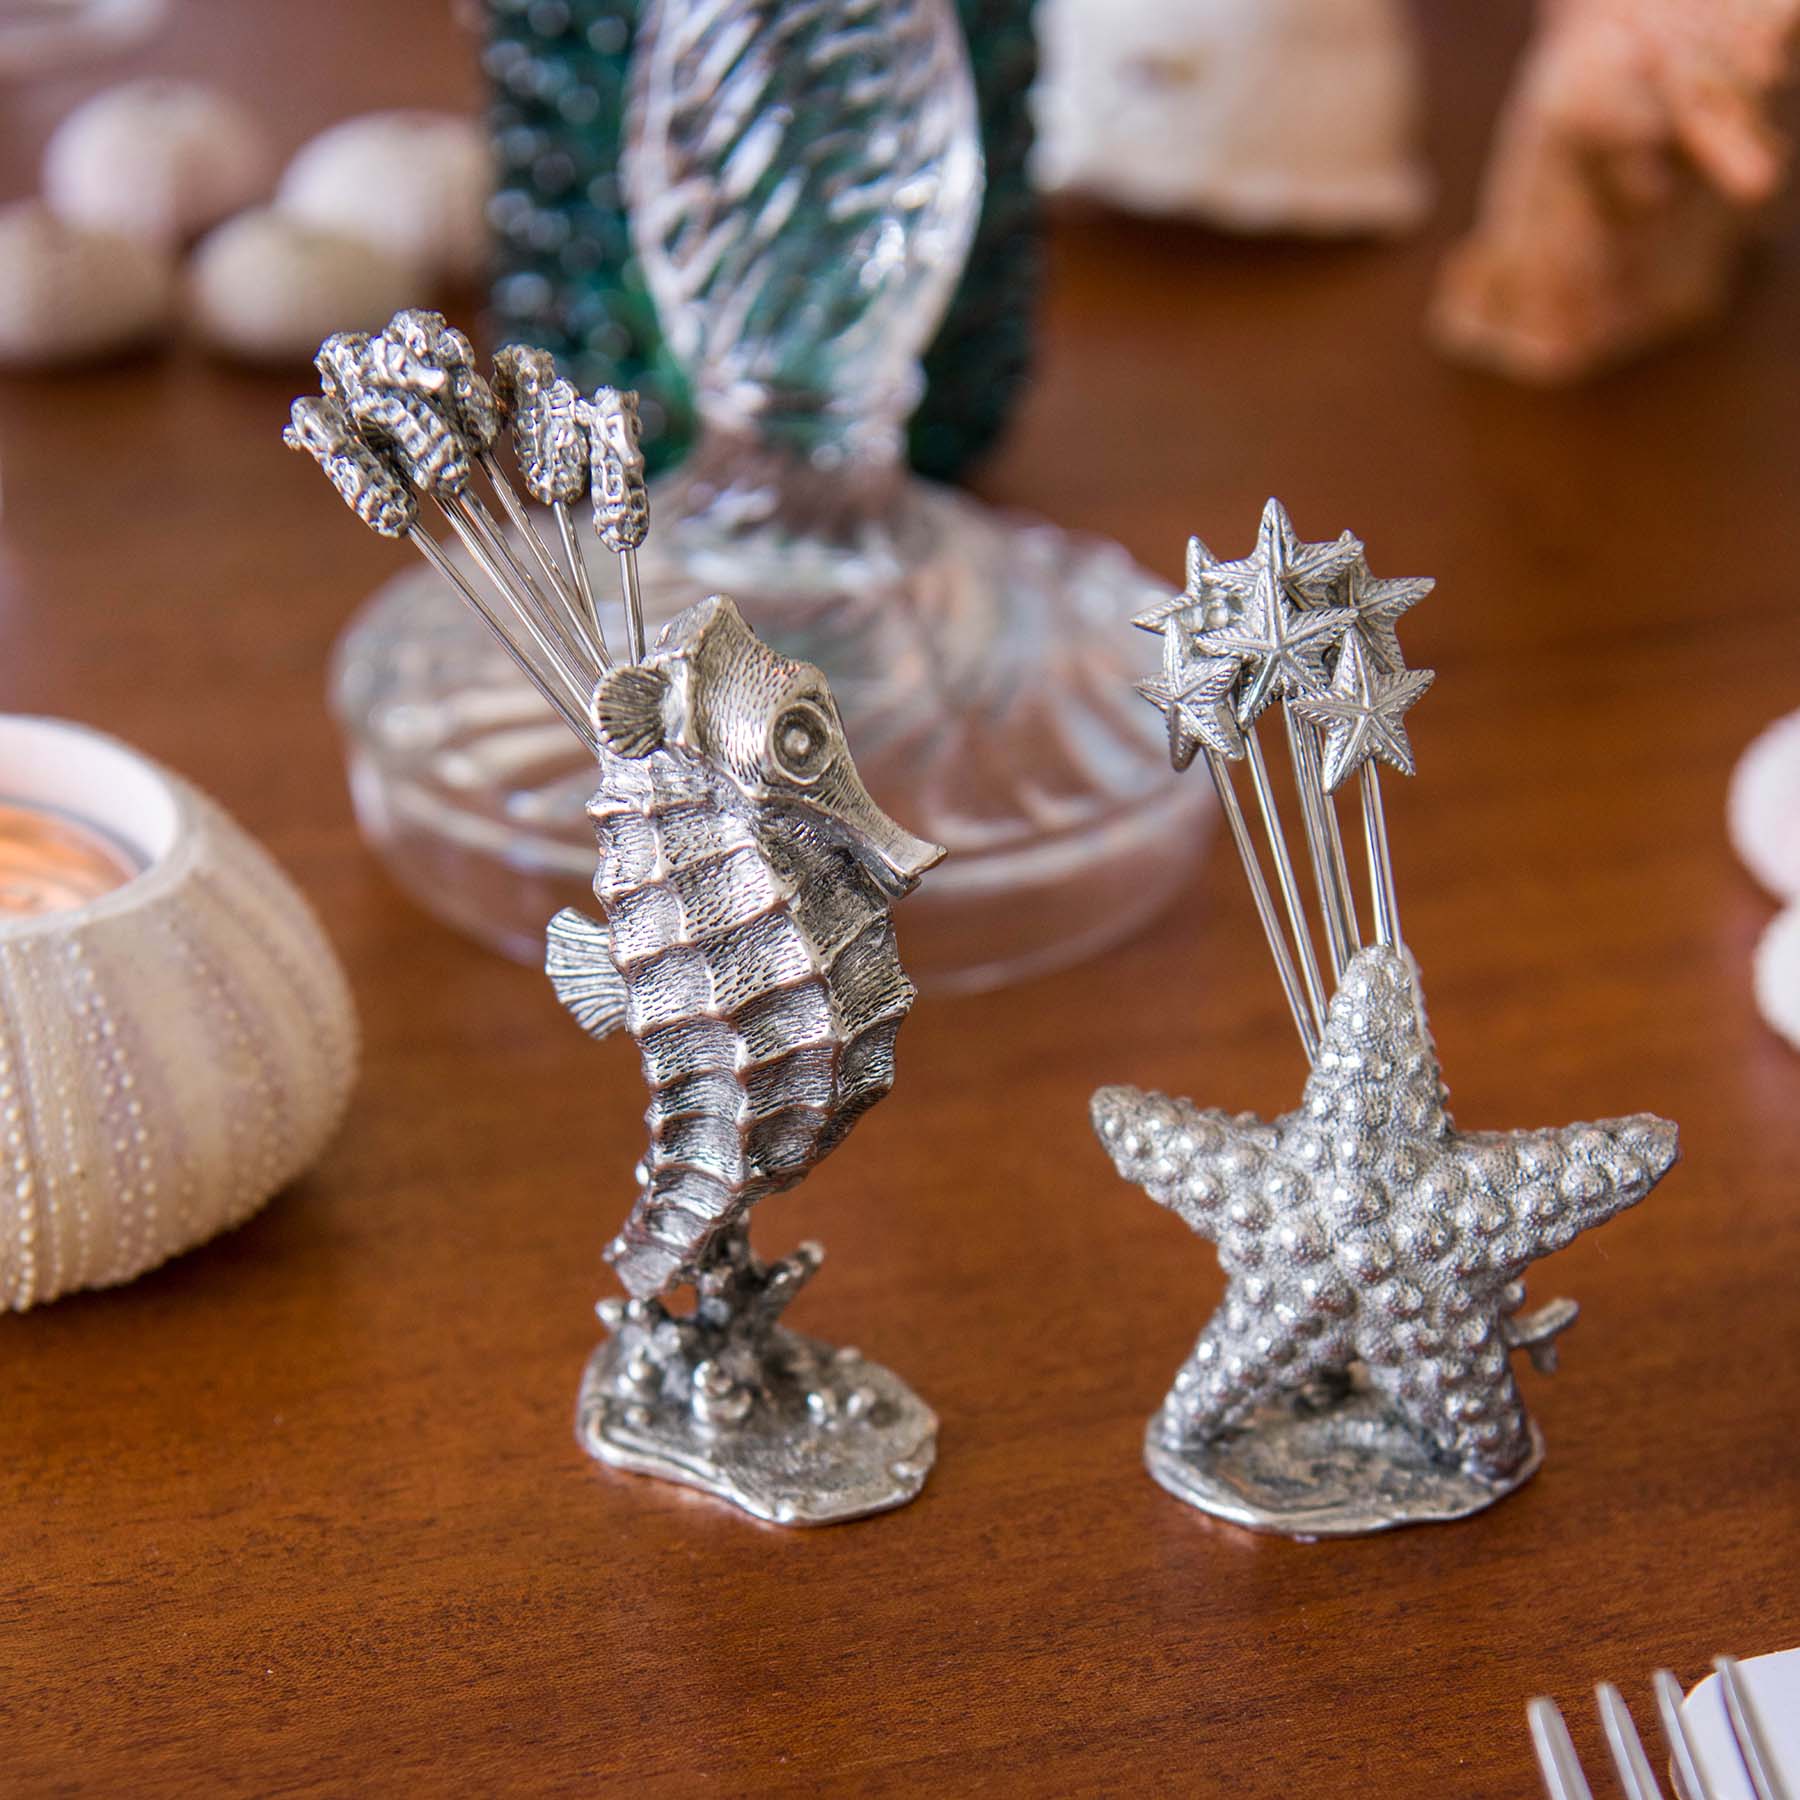 Pewter Seahorse shaped Pick Set with seahorses at one end of each of the picks placed on a table ,a glass and tableware can be seen surrounding it